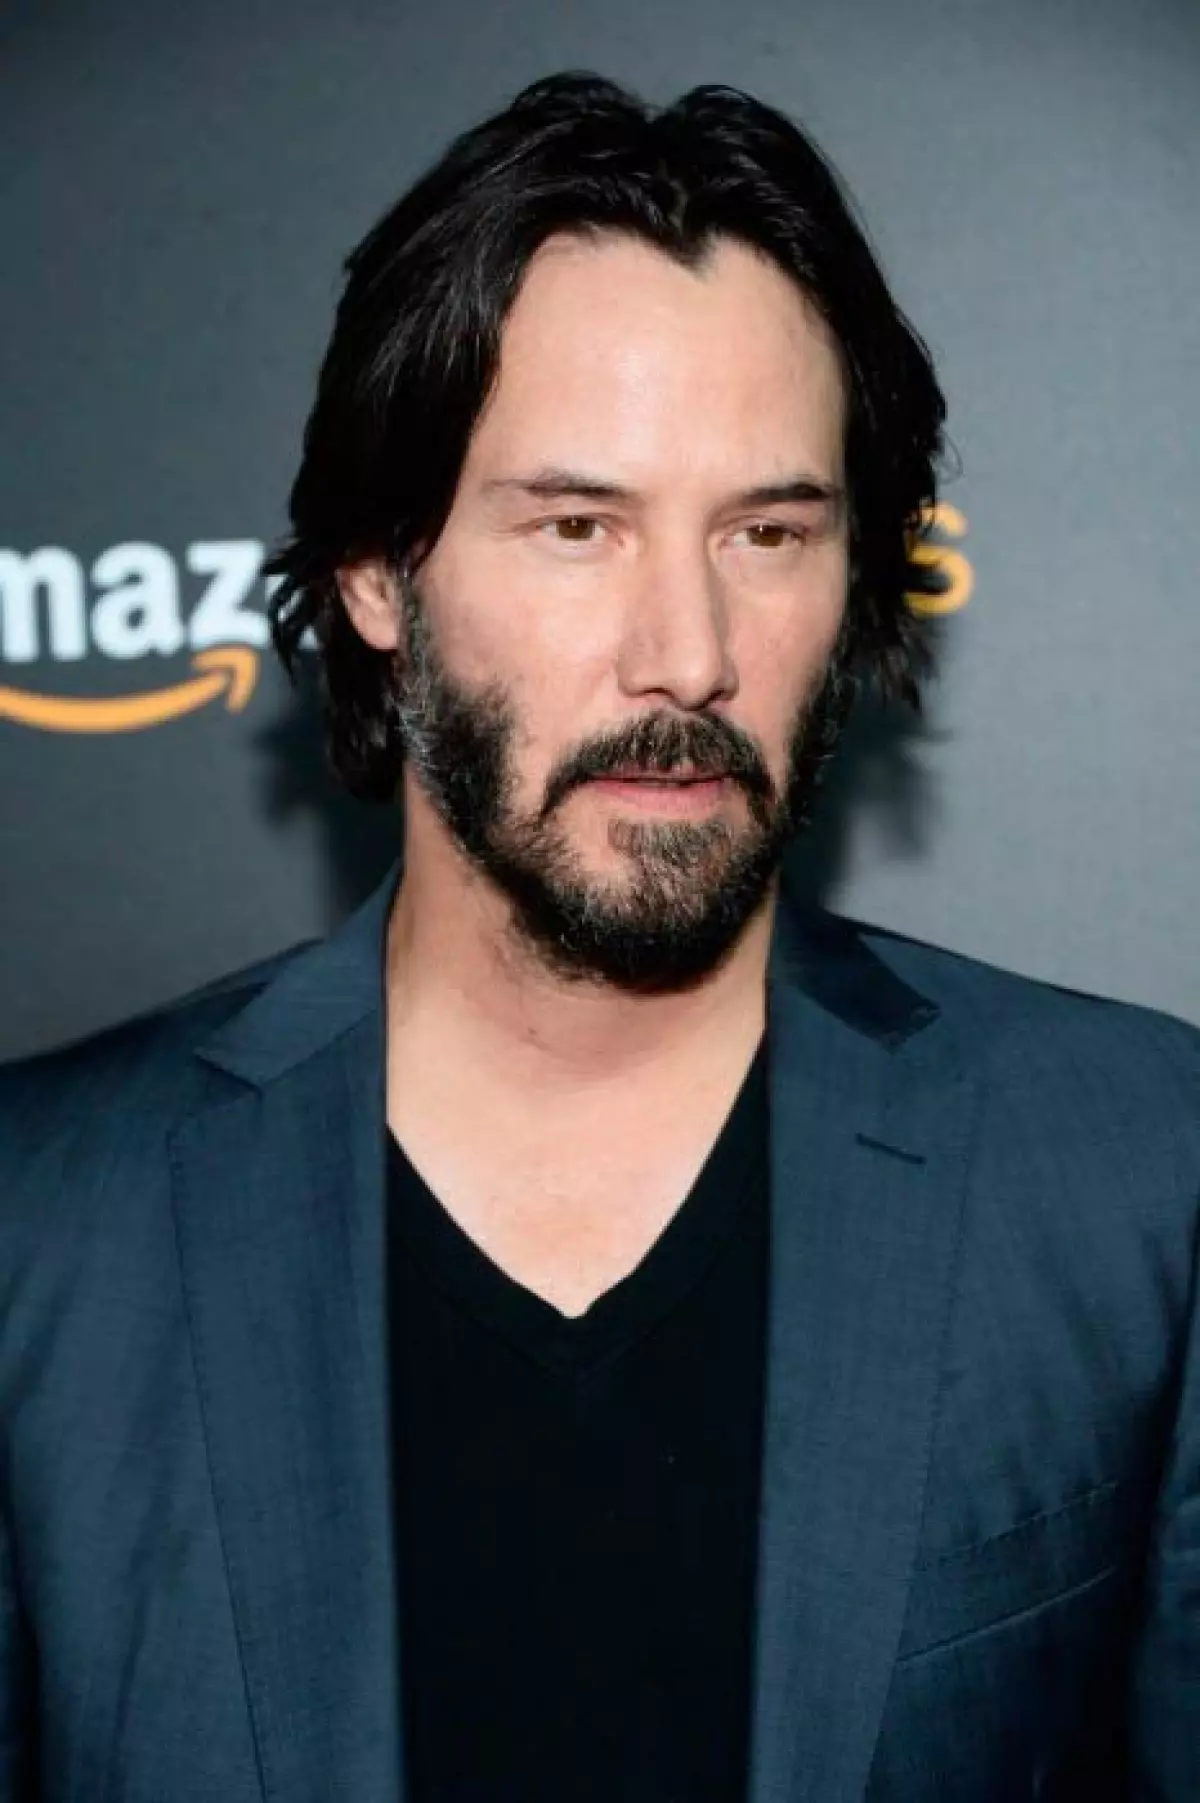 Keanu Reeves at the premiere of Amazon’s The Neon Demon in June 2016